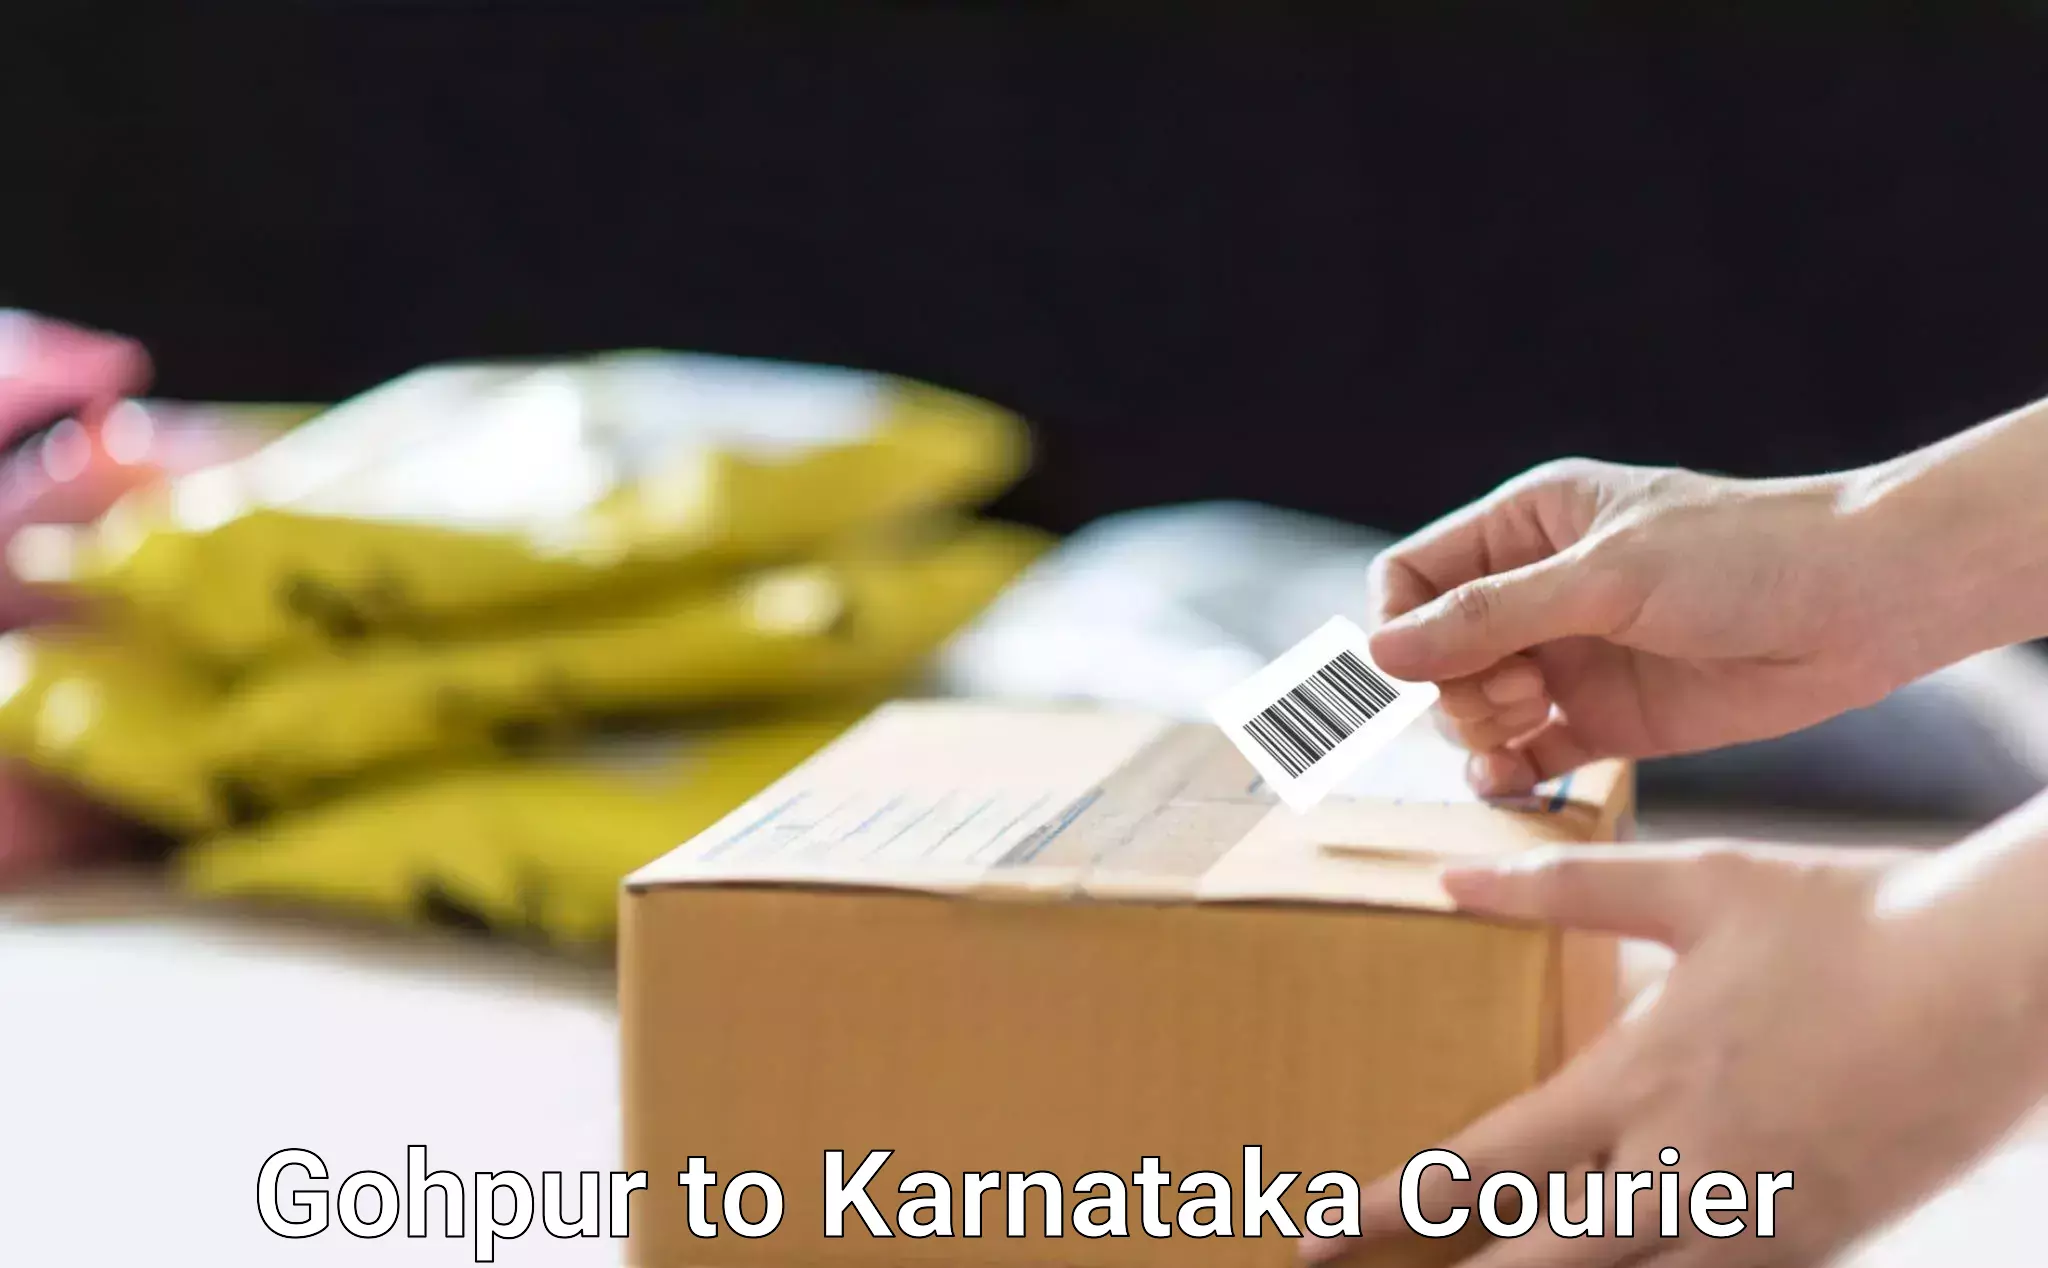 Quality courier partnerships in Gohpur to Surathkal